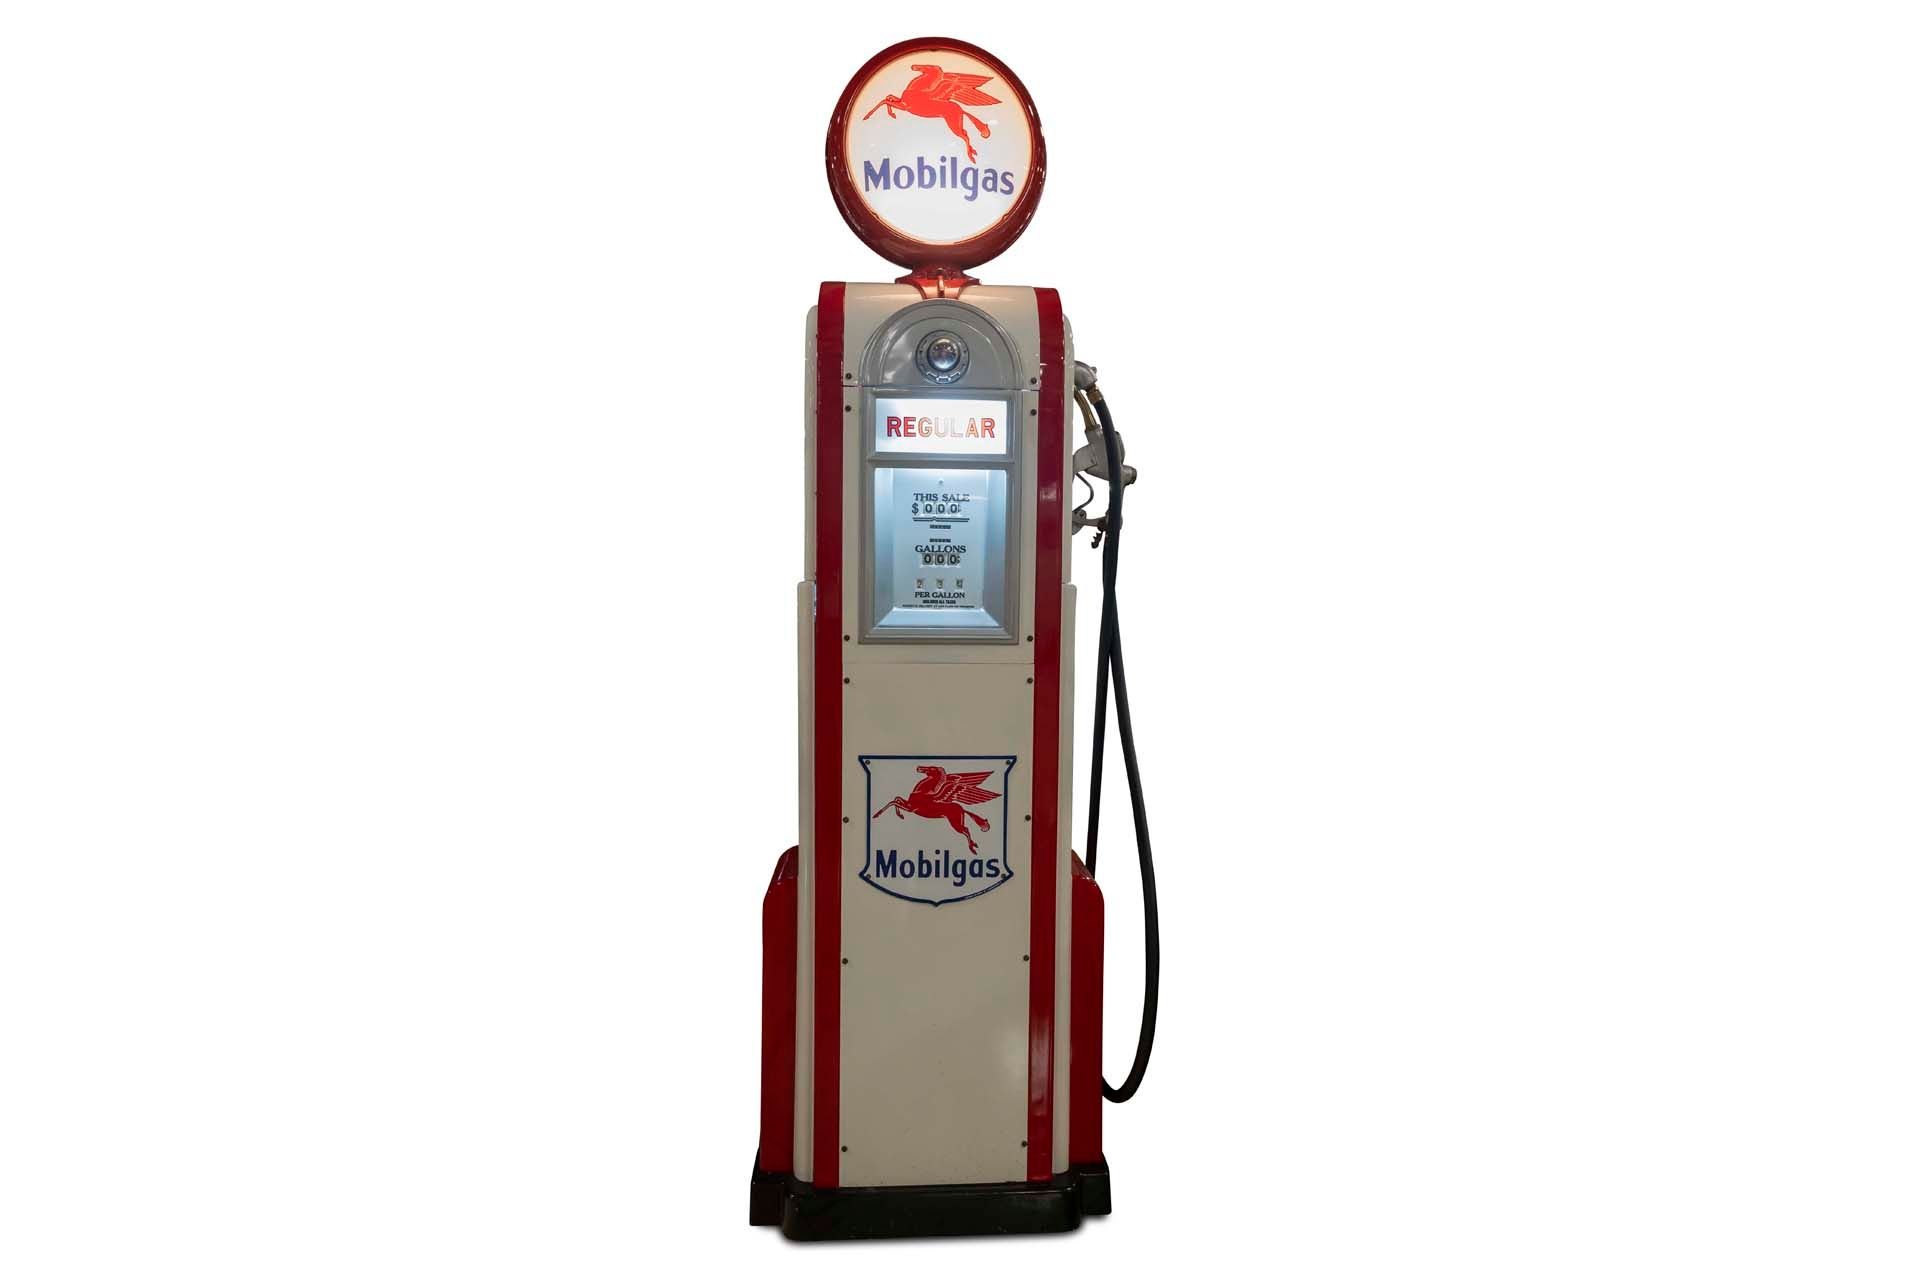 For Sale 'Mobilgas' Gas Pump, Reproduction Glass Globe